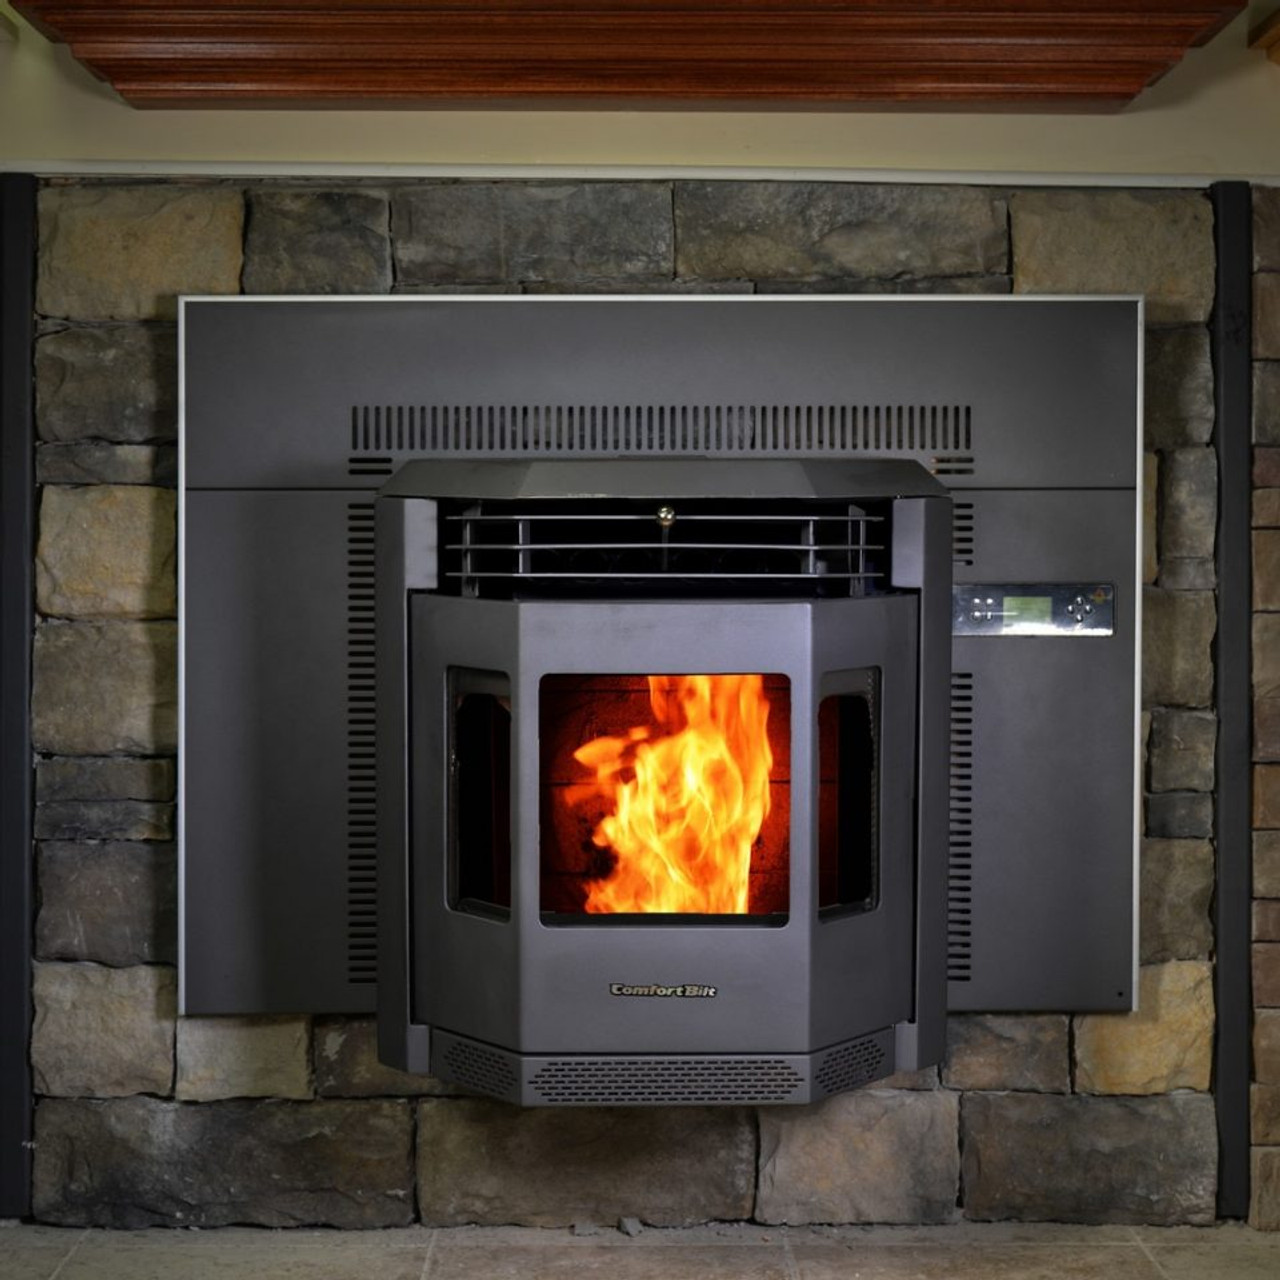 Pellet Stoves: Inserts, Freestanding Stoves, Costs & More - This